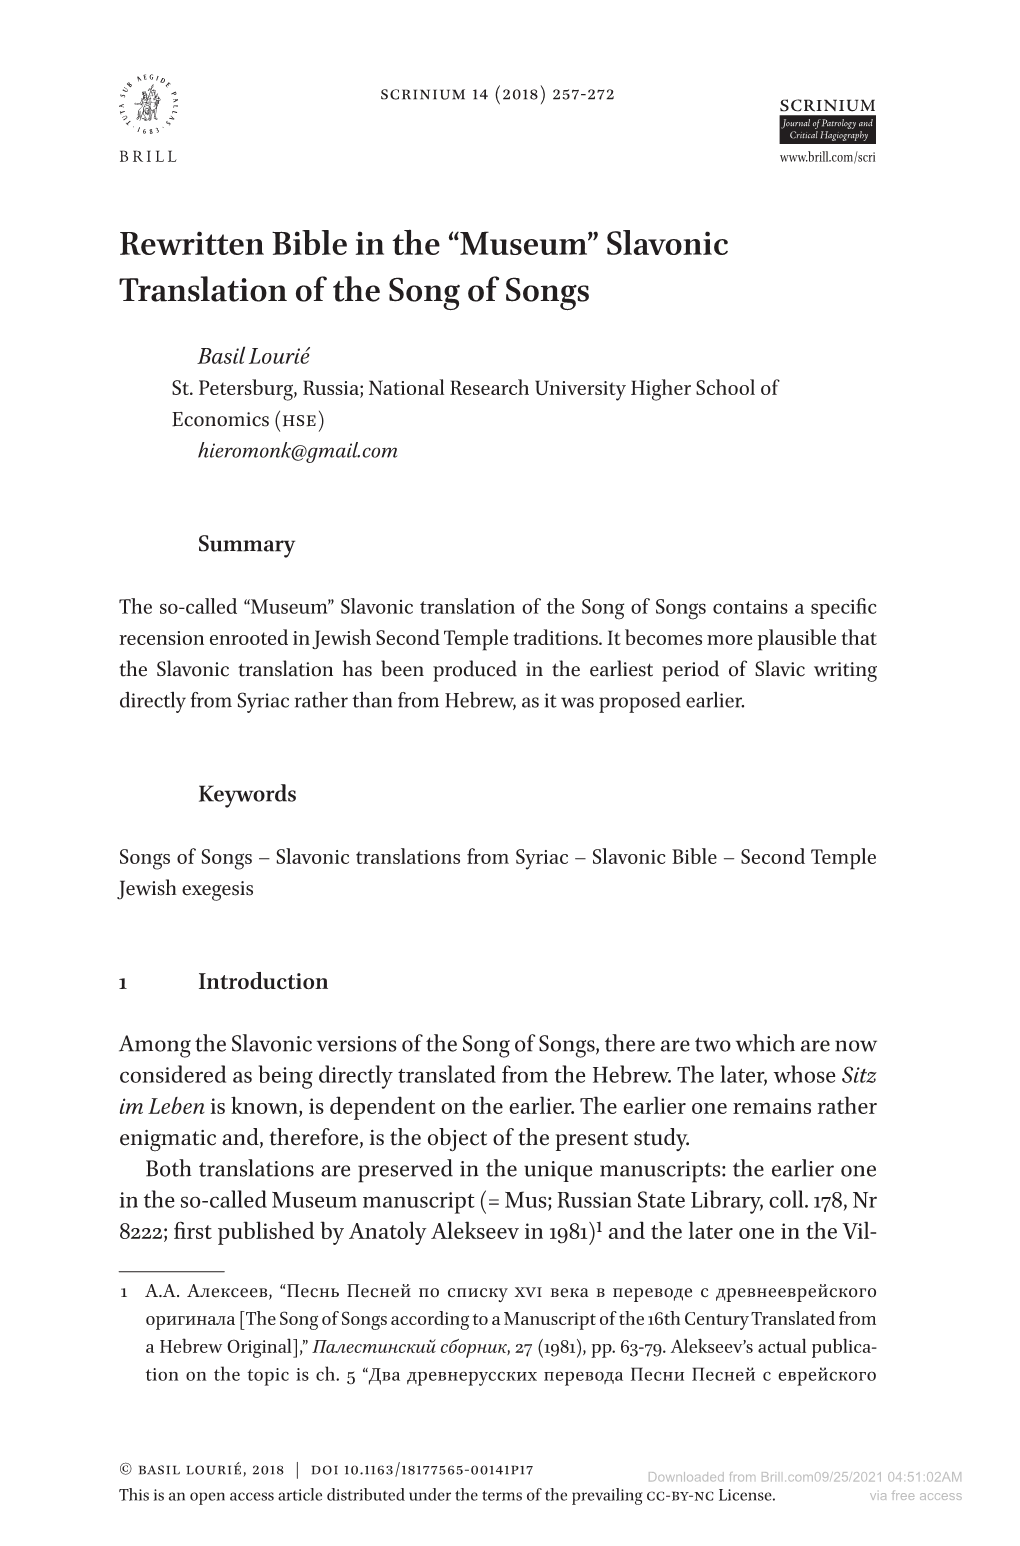 Rewritten Bible in the “Museum” Slavonic Translation of the Song of Songs